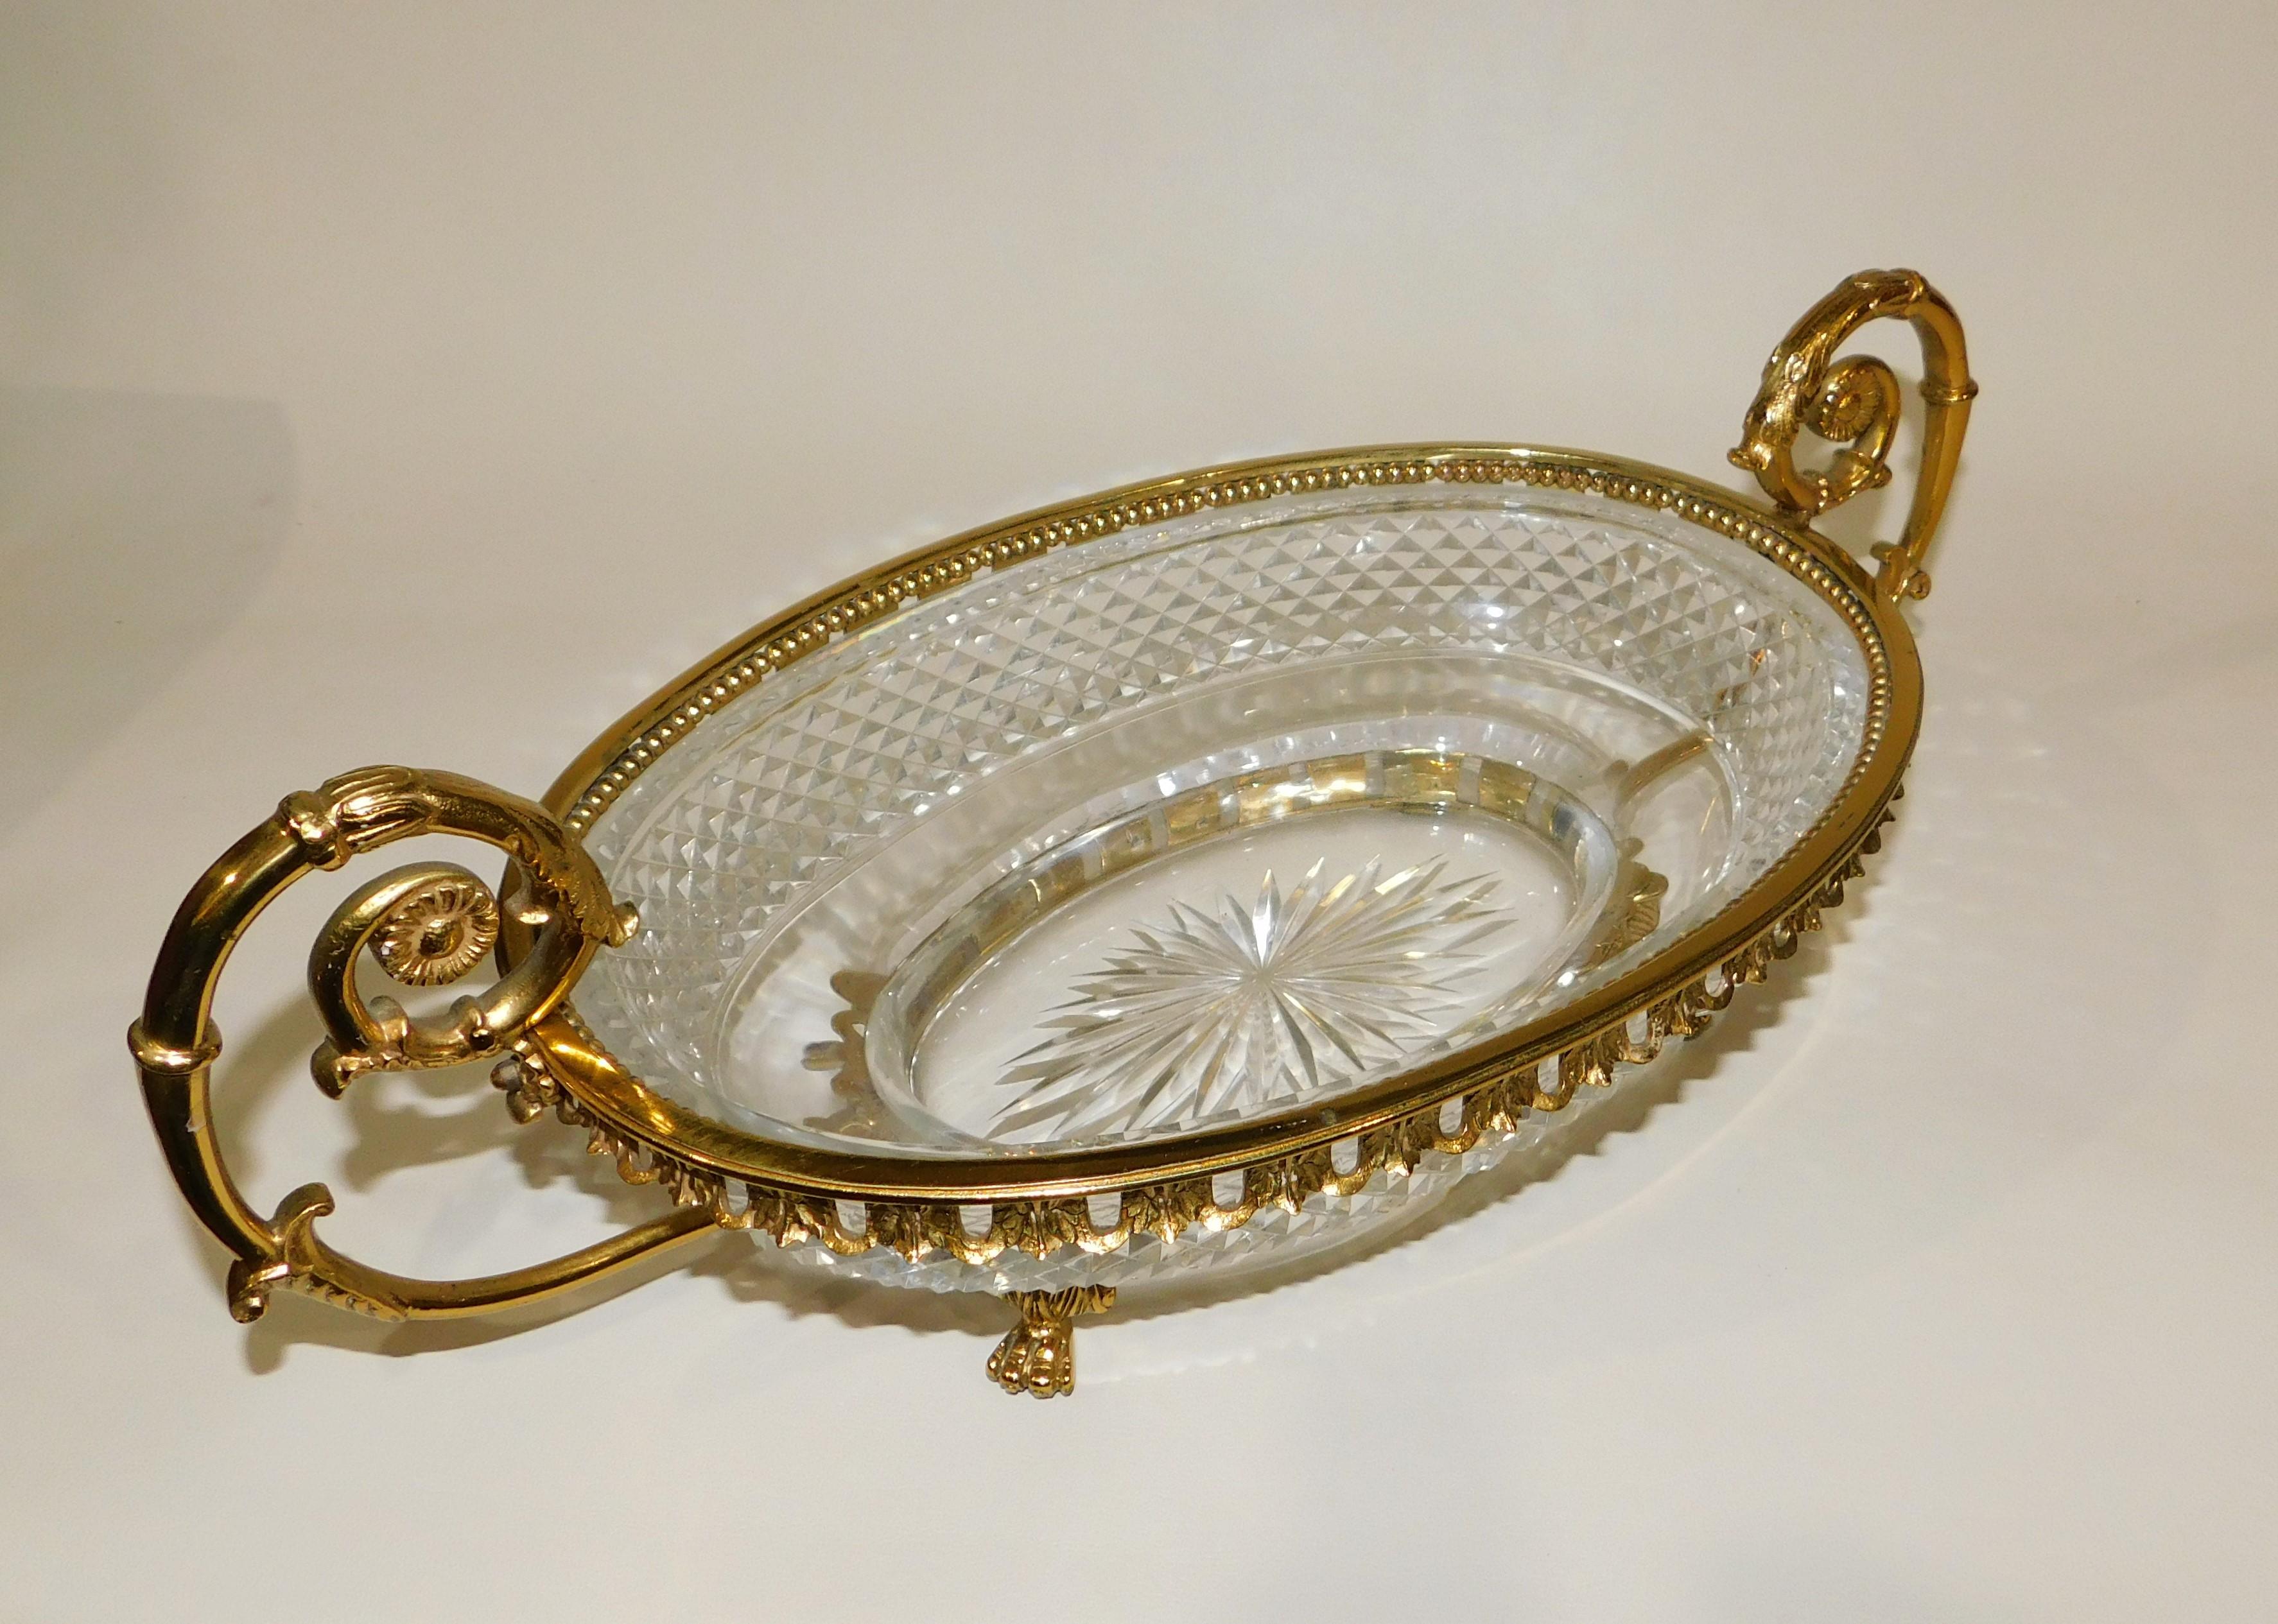 Beautiful 19th century French or Austrian gilt bronze and cut crystal centrepiece serving bowl sitting on four feet, in the manner of Baccarat.